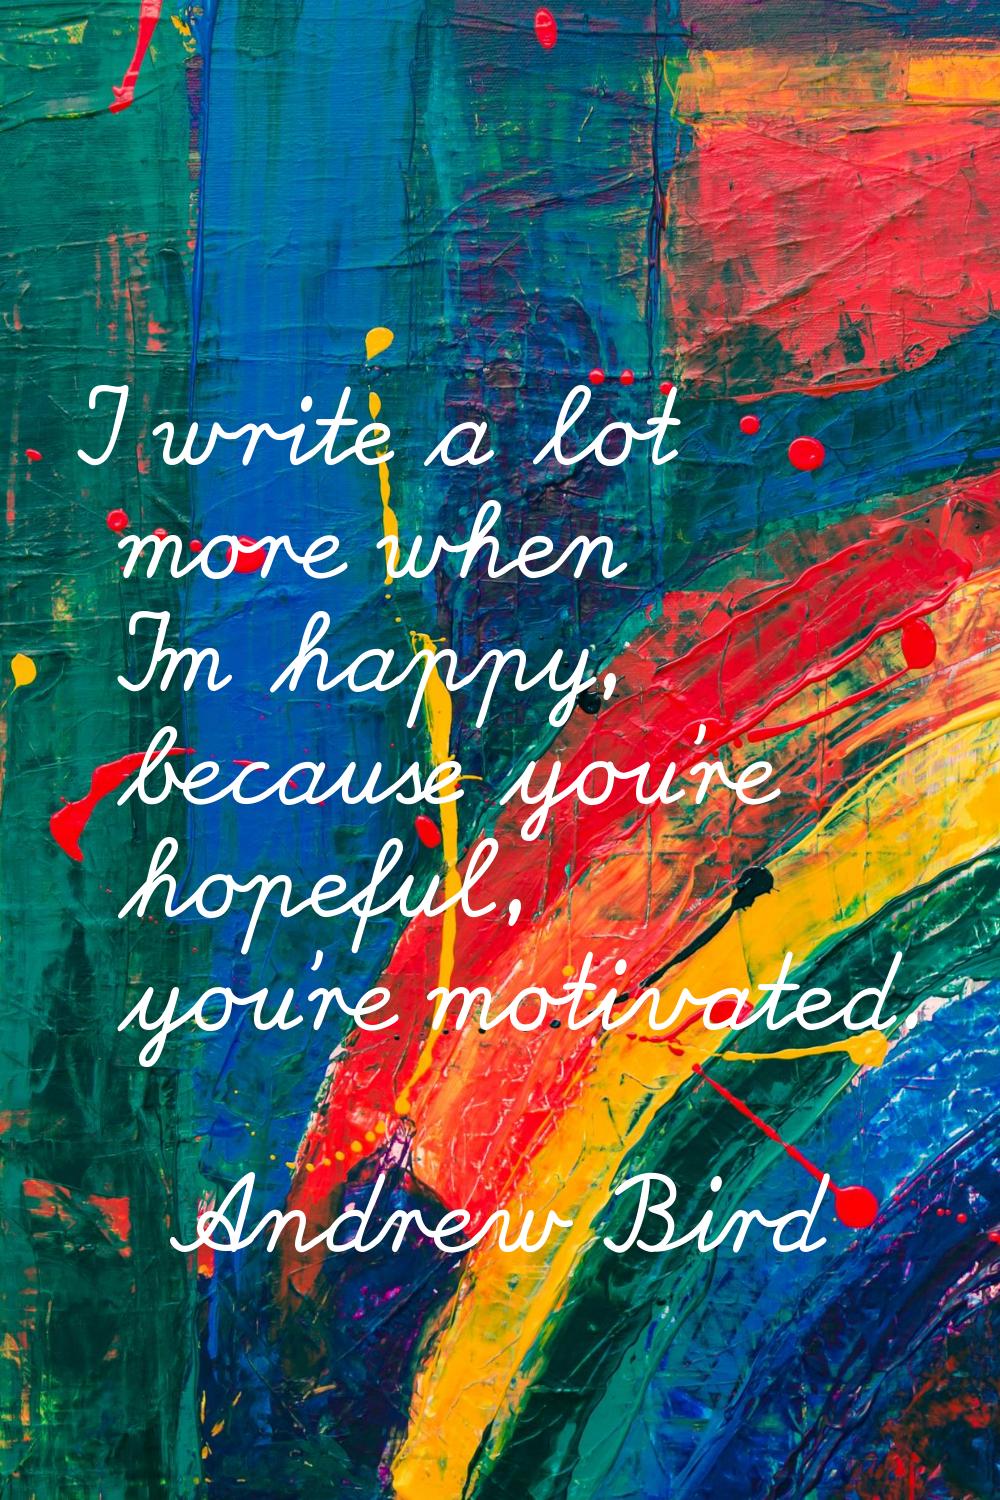 I write a lot more when I'm happy, because you're hopeful, you're motivated.